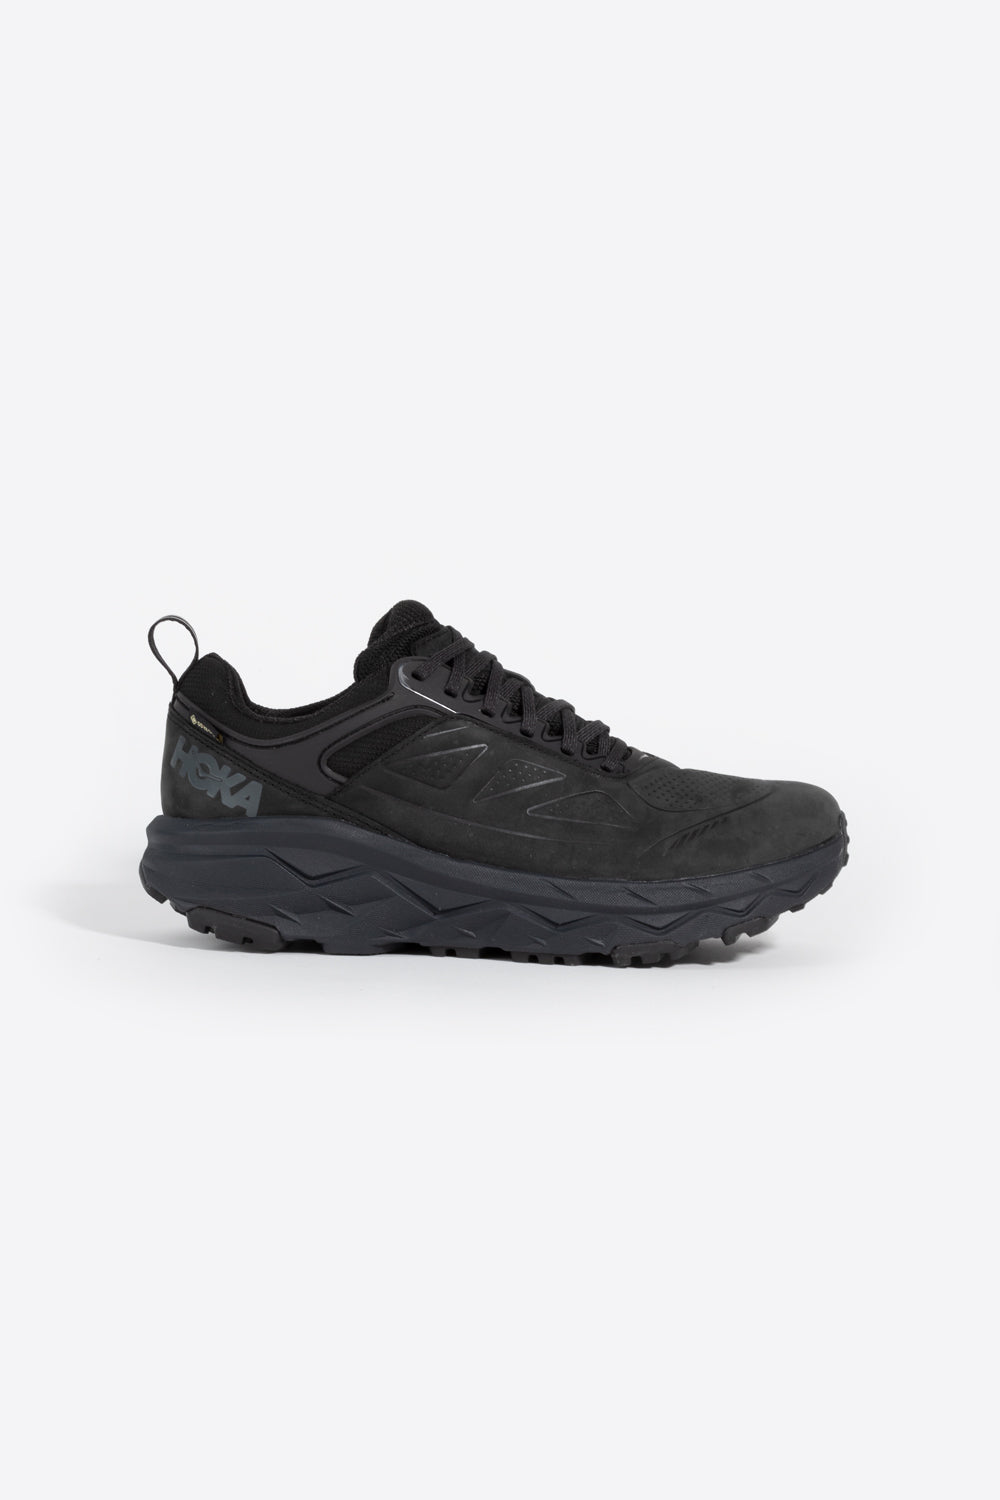 Hoka One One Challenger Low GTX in 